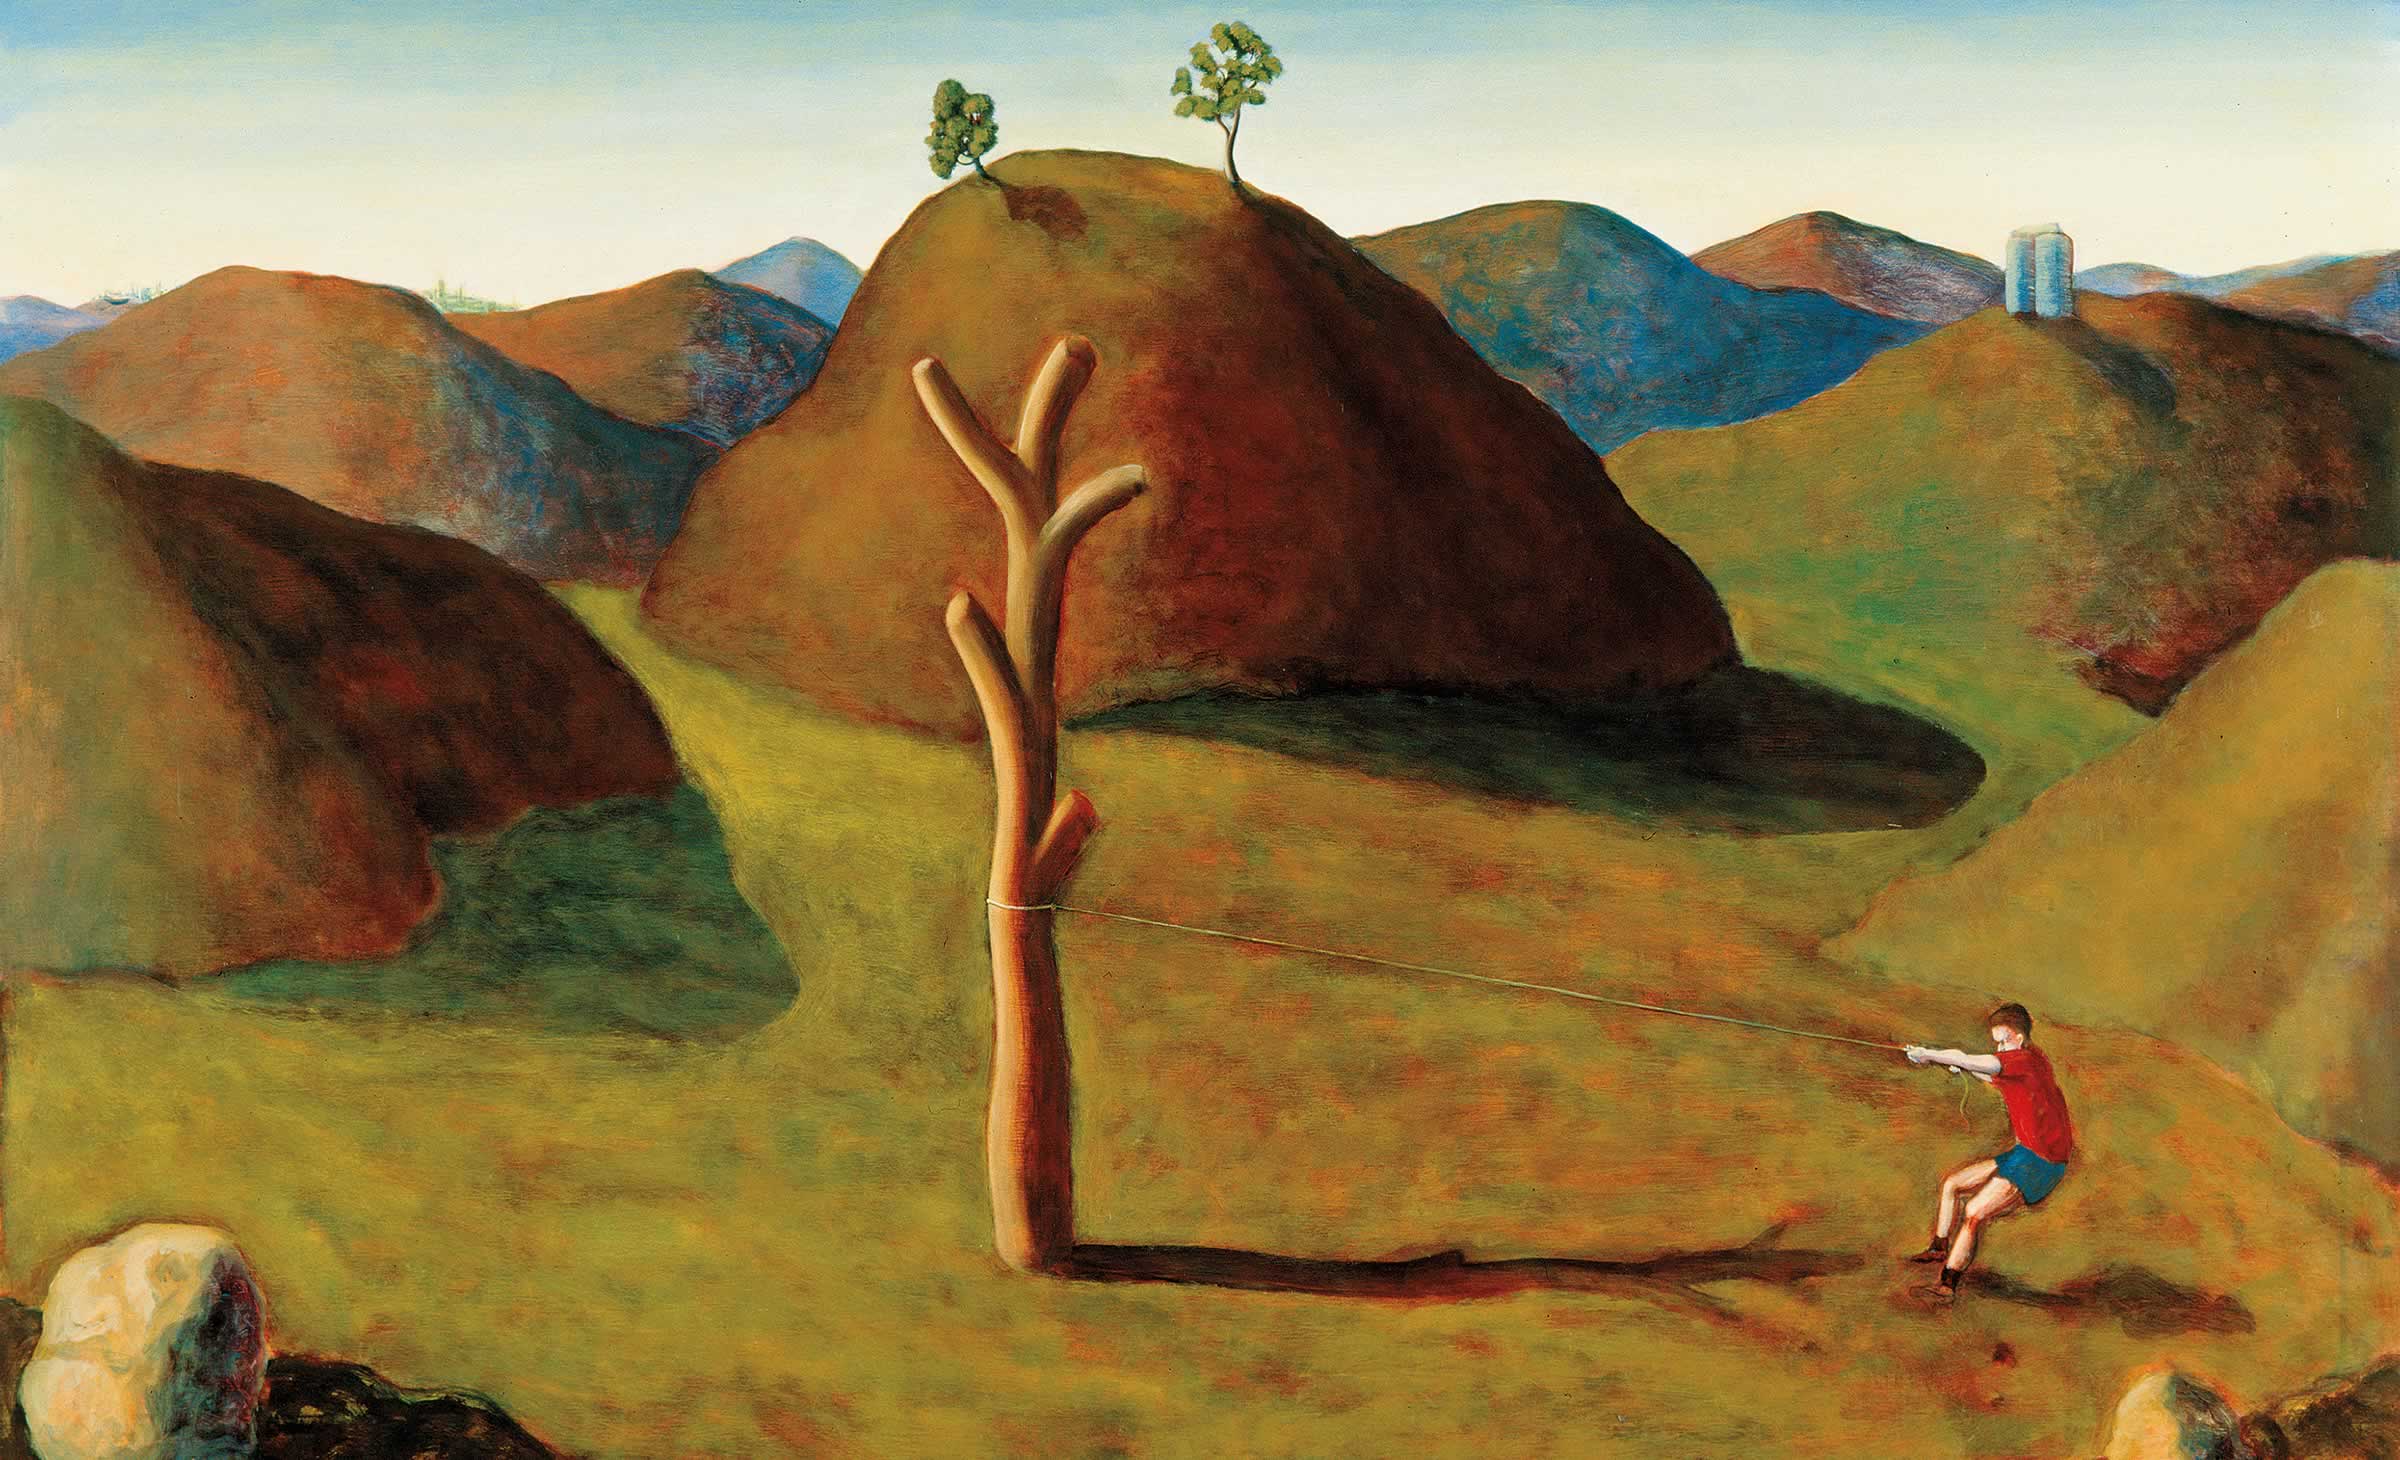 Painting by artist David Keeling titled Empty gesture (1988), showing an almost treeless landscape with a man tugging on a rope tied around the last dead tree.